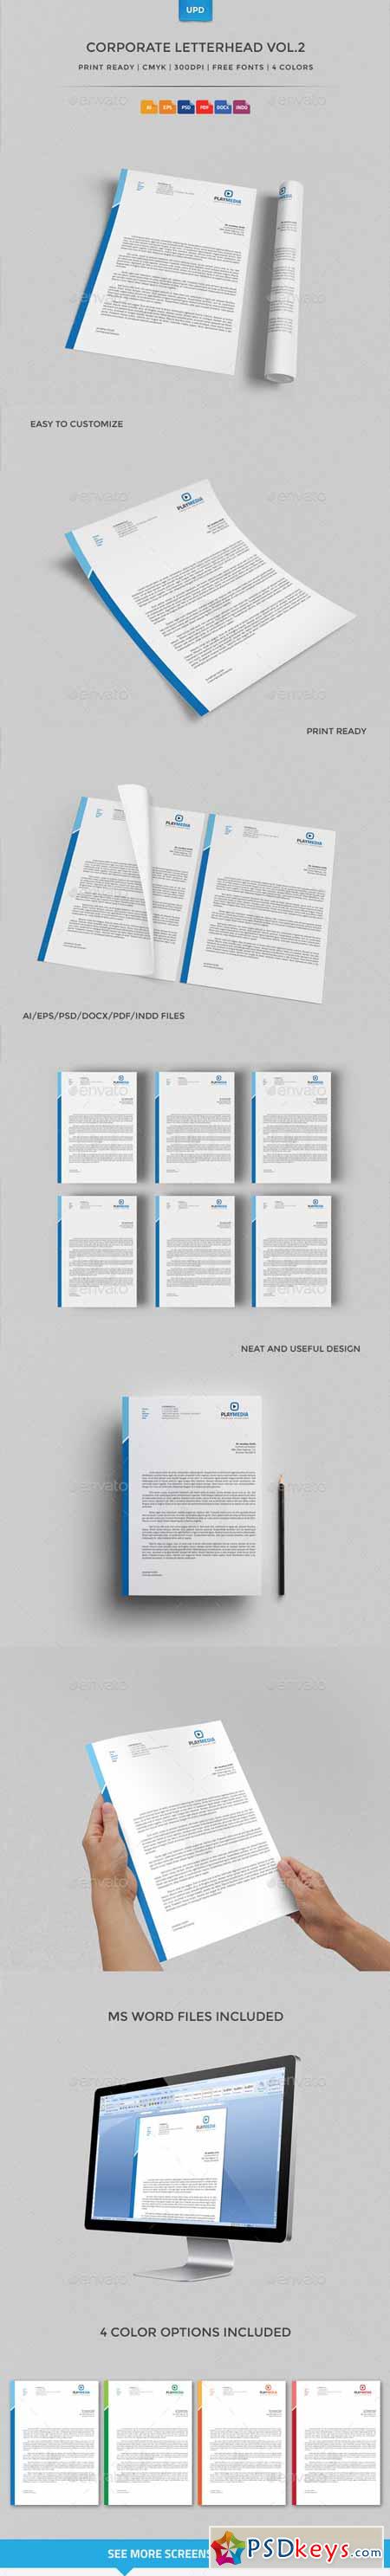 Corporate Letterhead Vol.2 with MS Word Doc 6651984